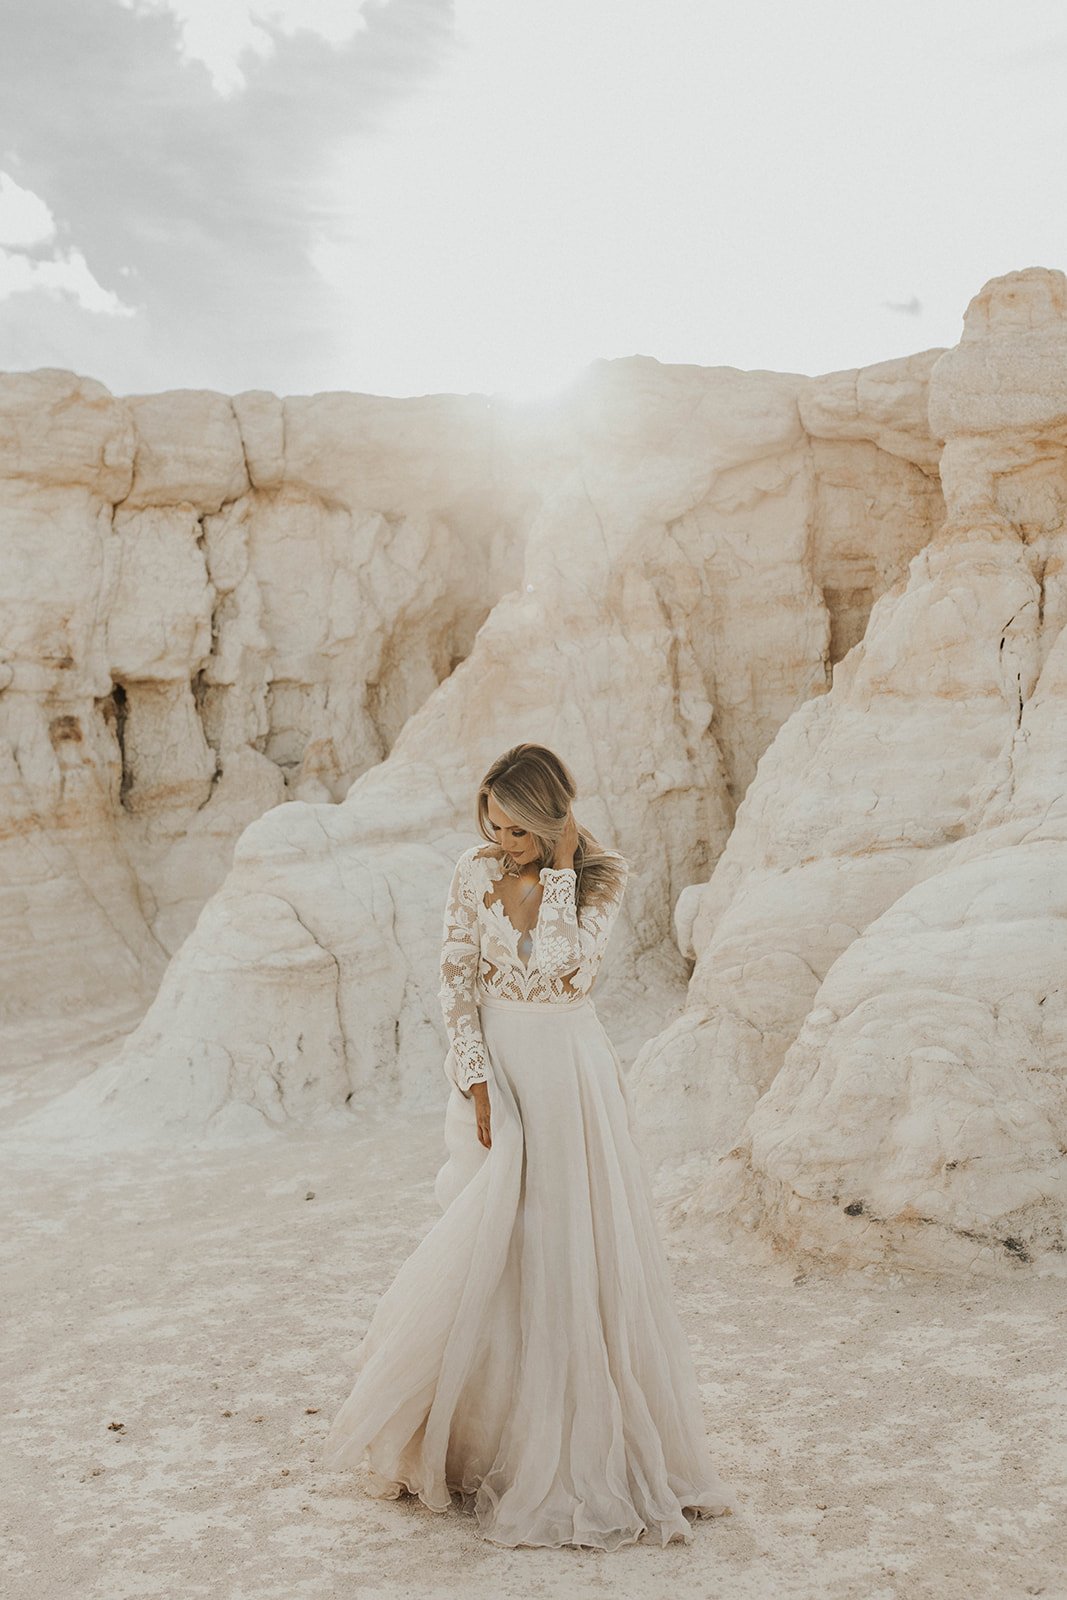 linyage bridal separates - elopement wedding dresses that are packable, hike-able &amp; comfortable for adventure brides and beyond.